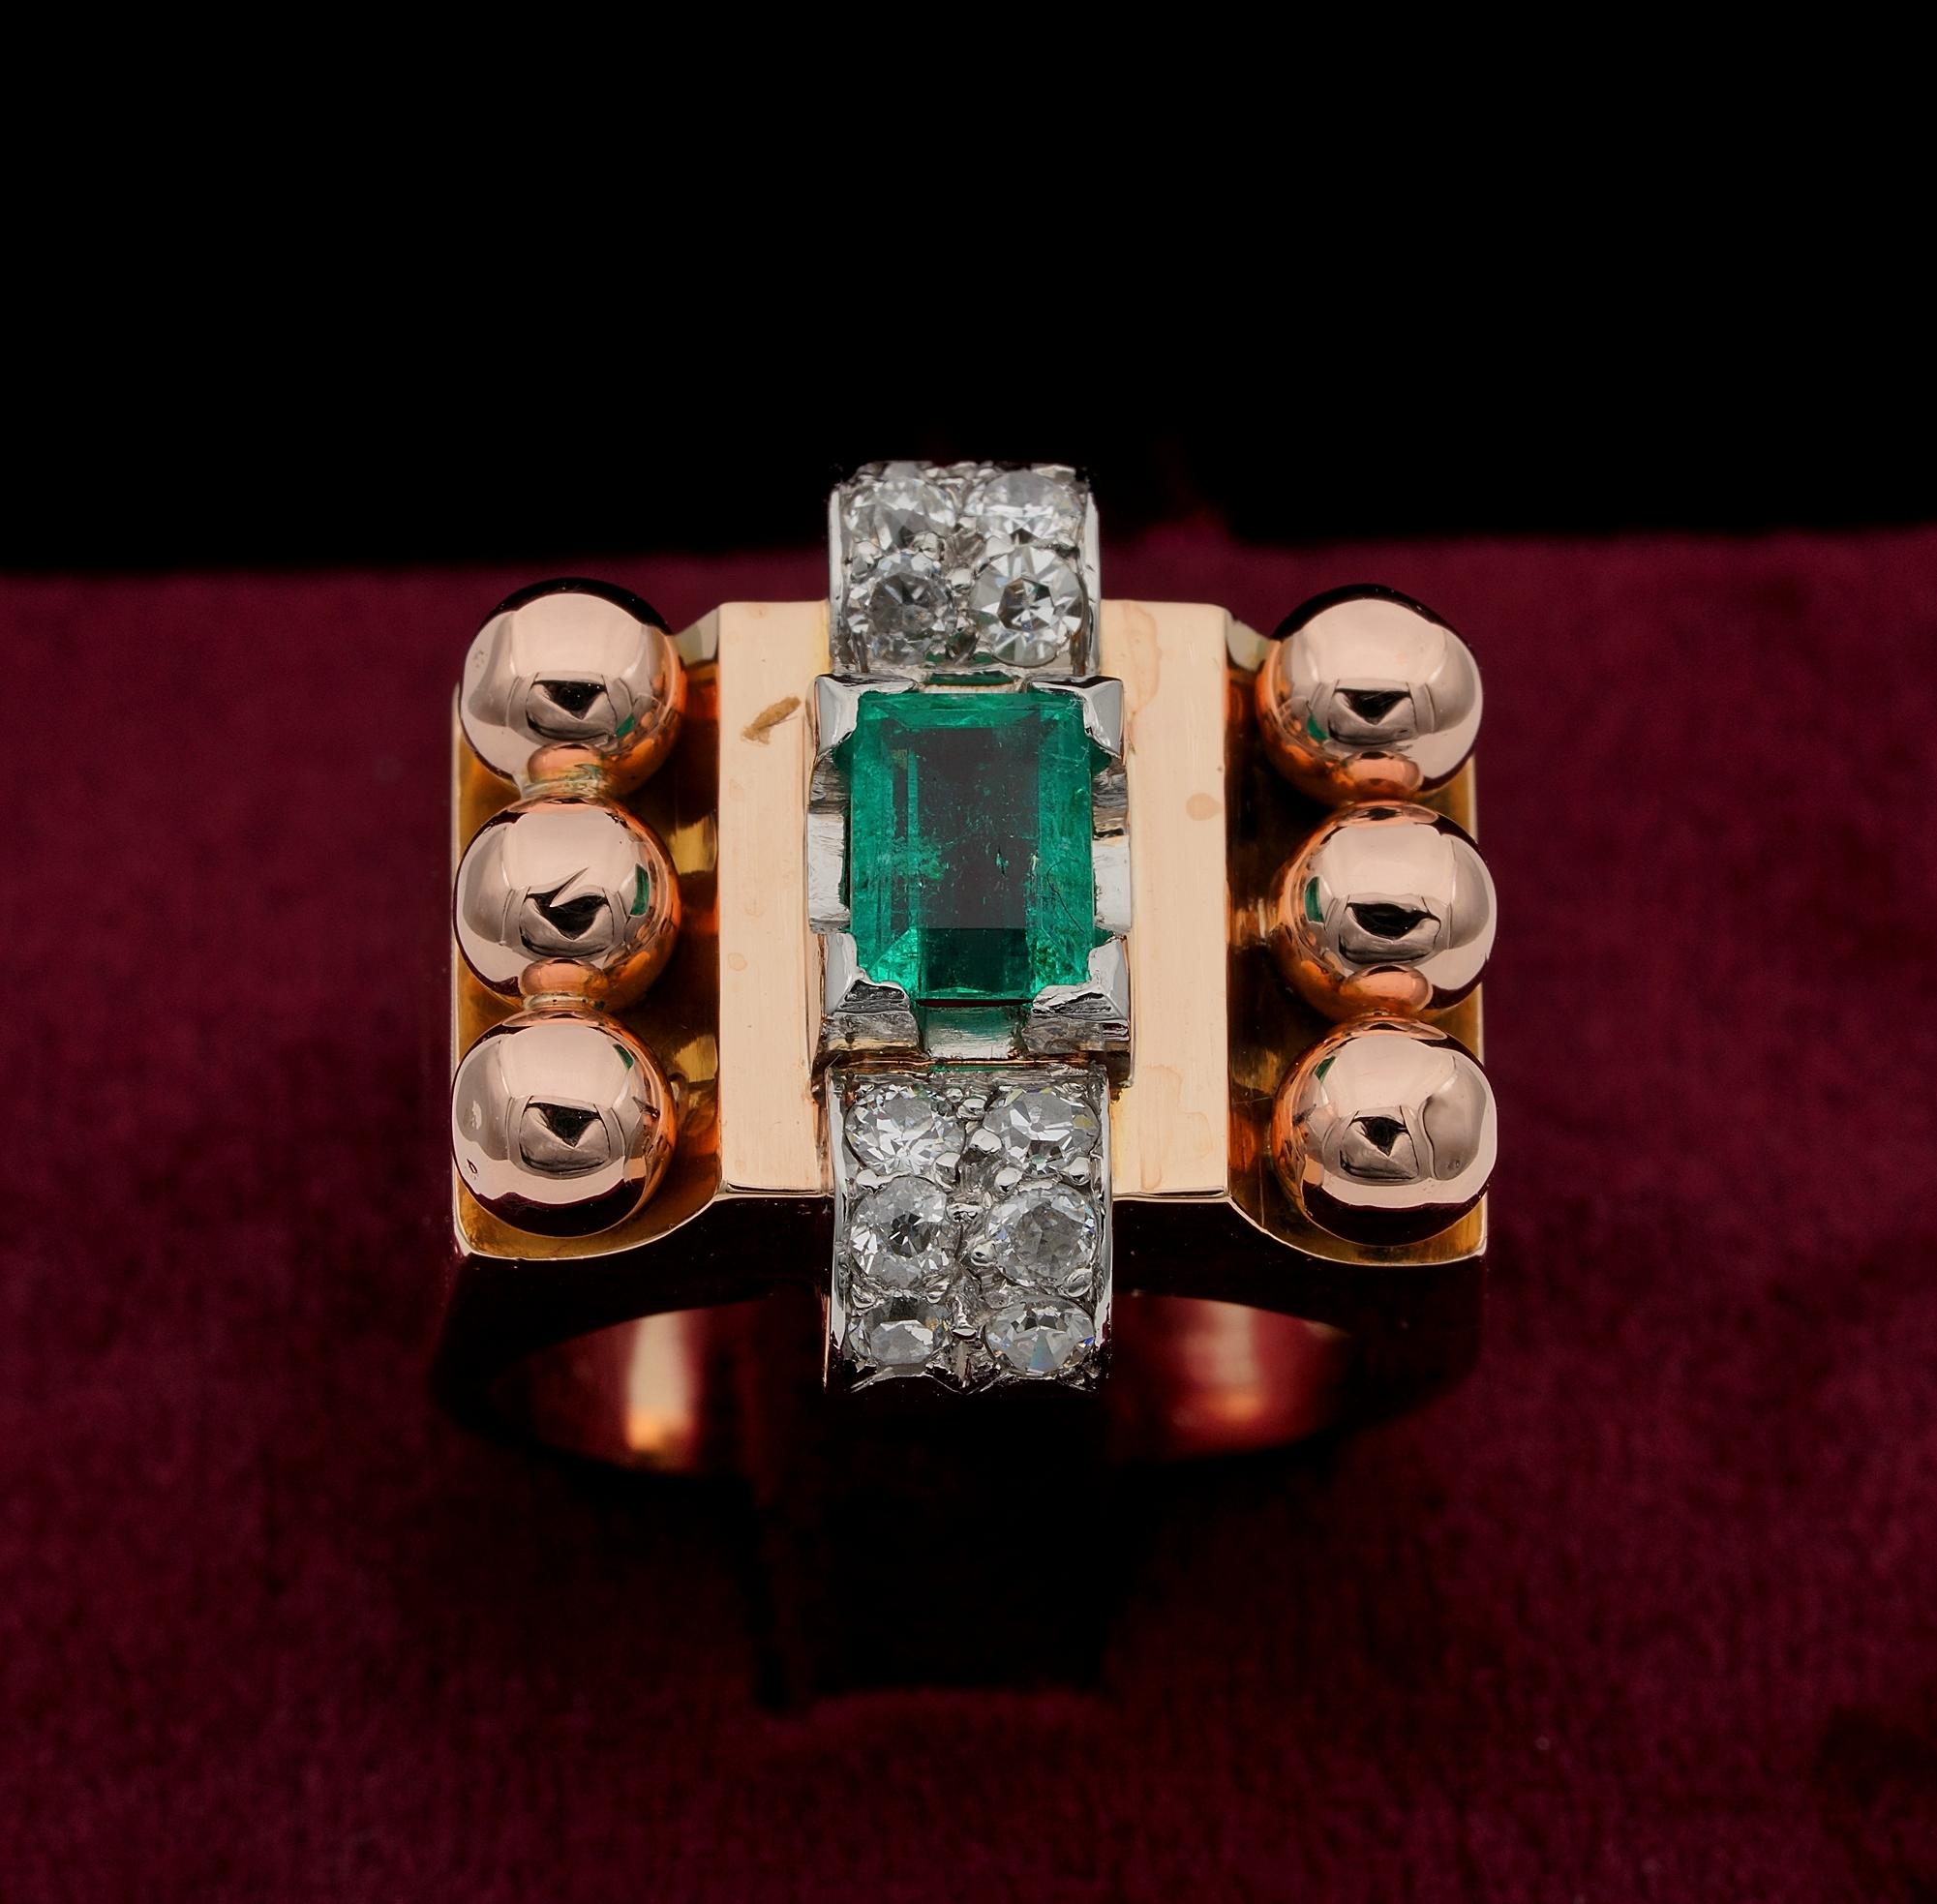 This fabulous Retro period ring is 1935/40 circa
Bearing French import duty hallmark
Big, bold design was distinctive of the 40’s, this quite ring unique featuring strong character of the era has been skilfully made of solid 18 KT rose gold and